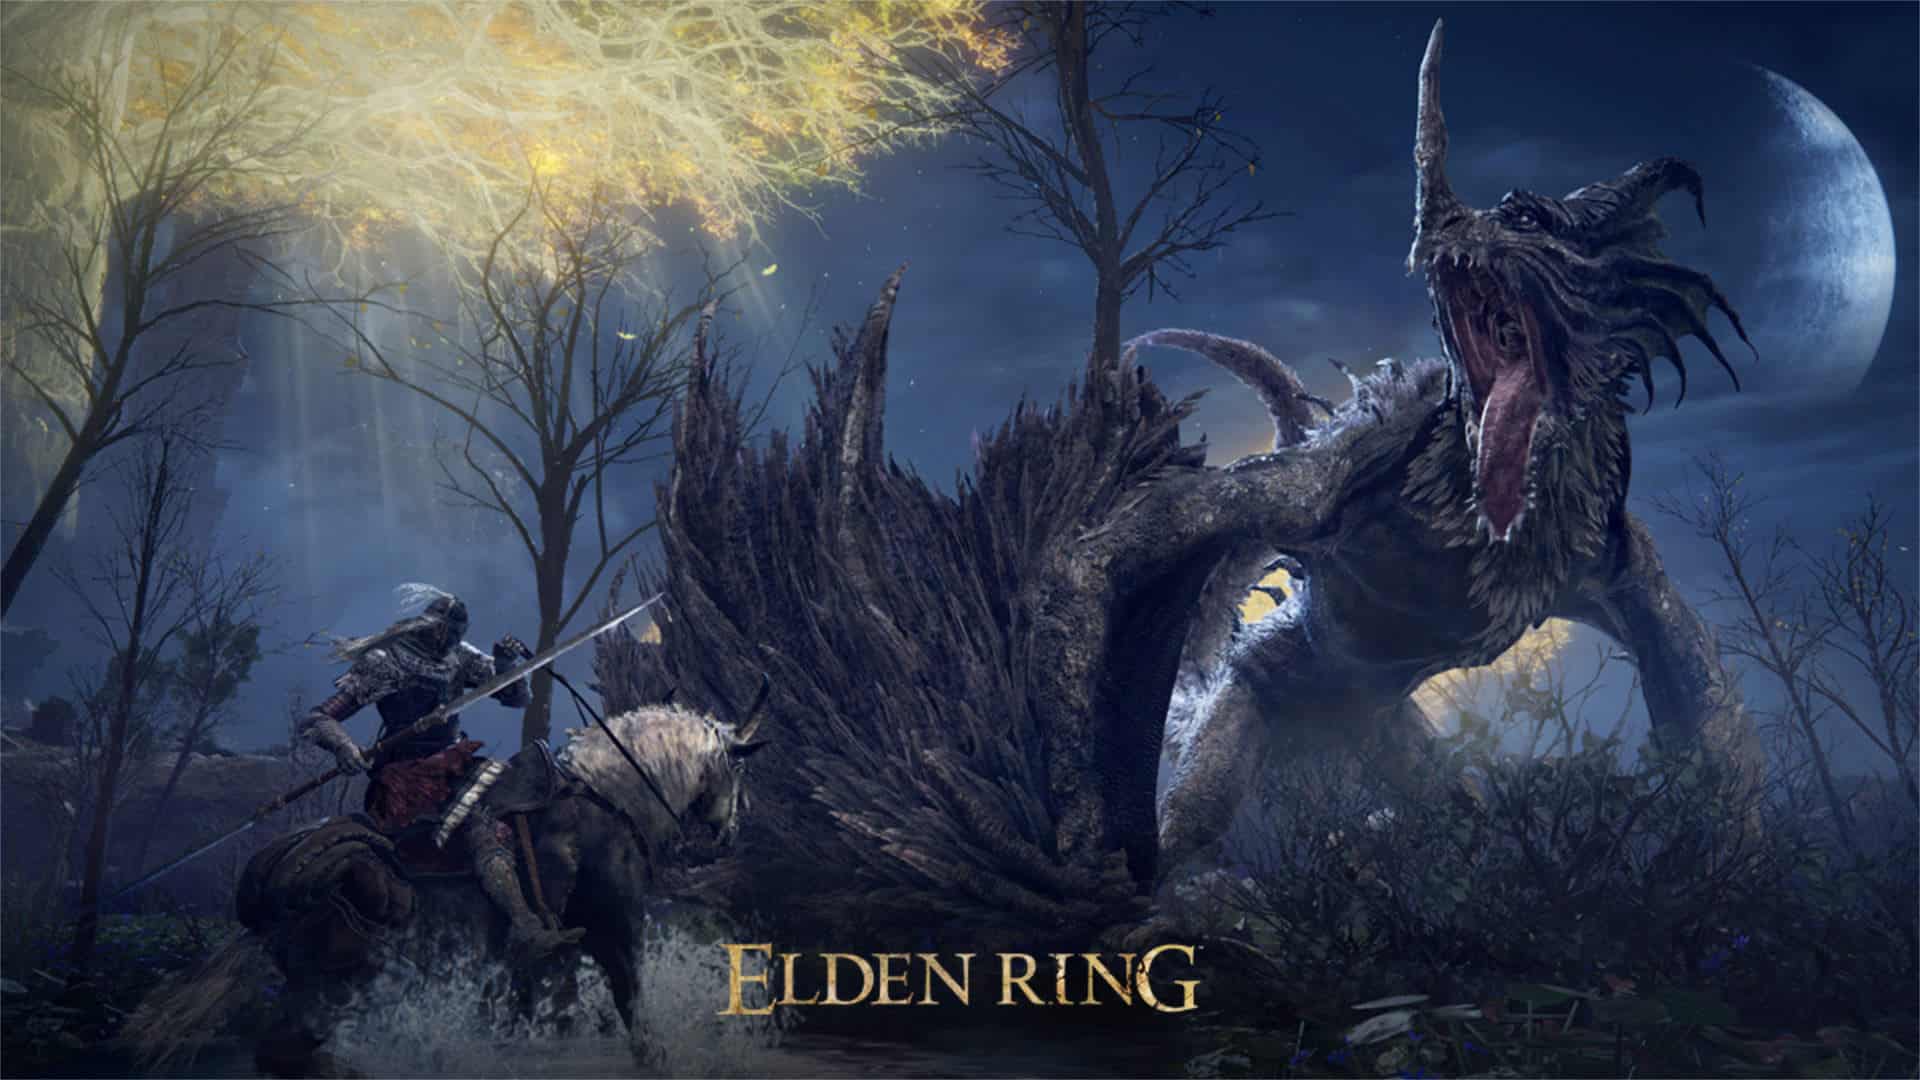 New Elden Ring Gameplay Details Reveal Dungeons, Fast Travel and More